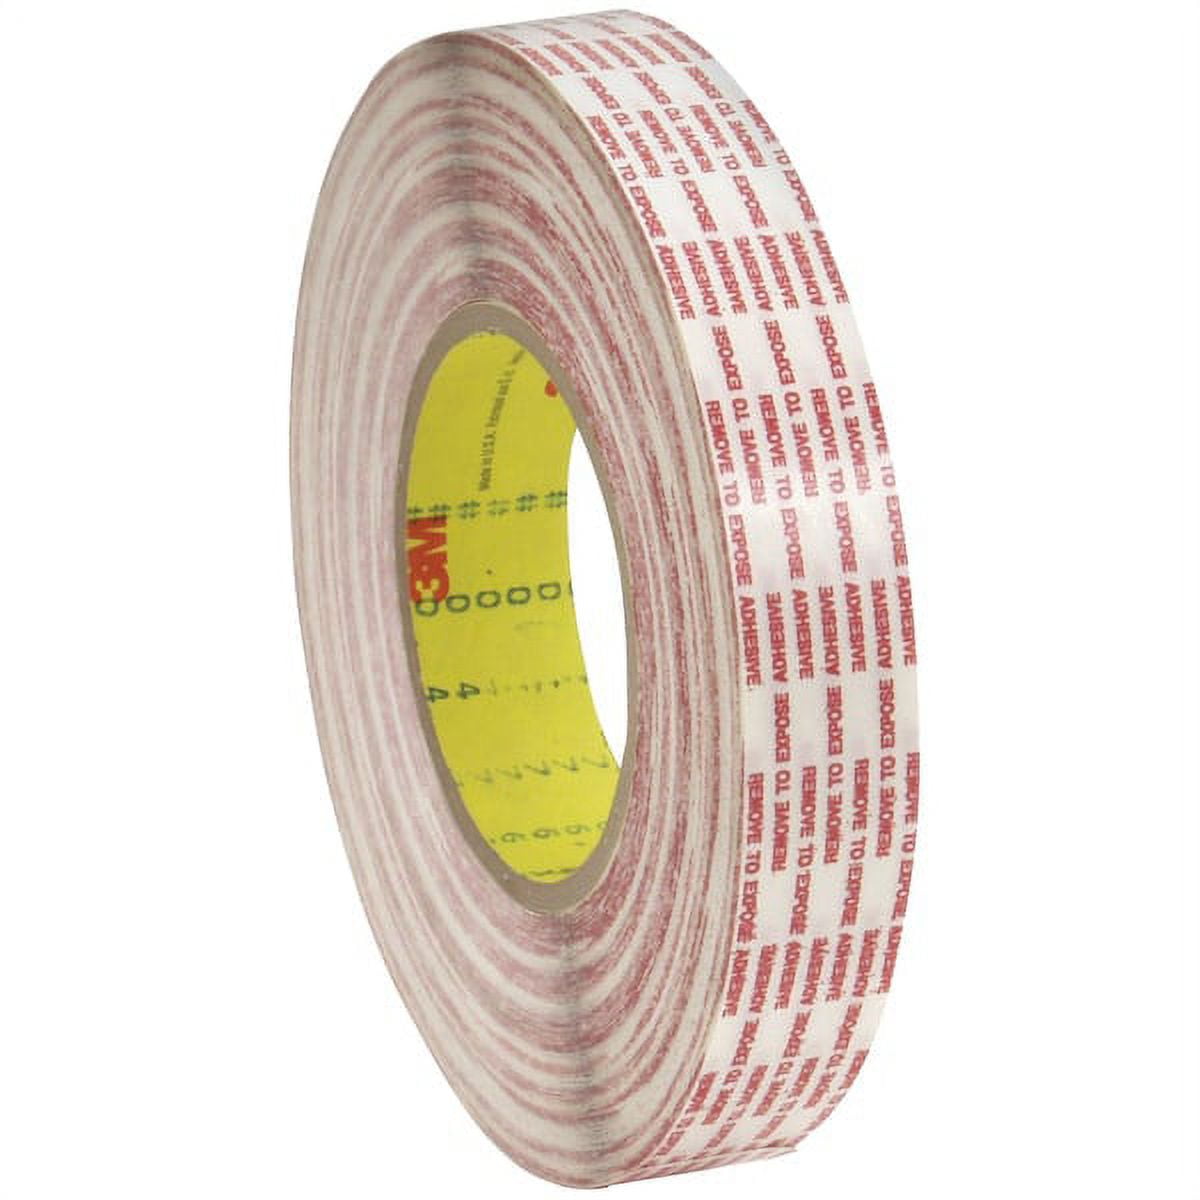 Gerich Double Side Tape Feature Waterproof Reusable Adhesive Transparent  Stickers, 3m Adhesive Tape